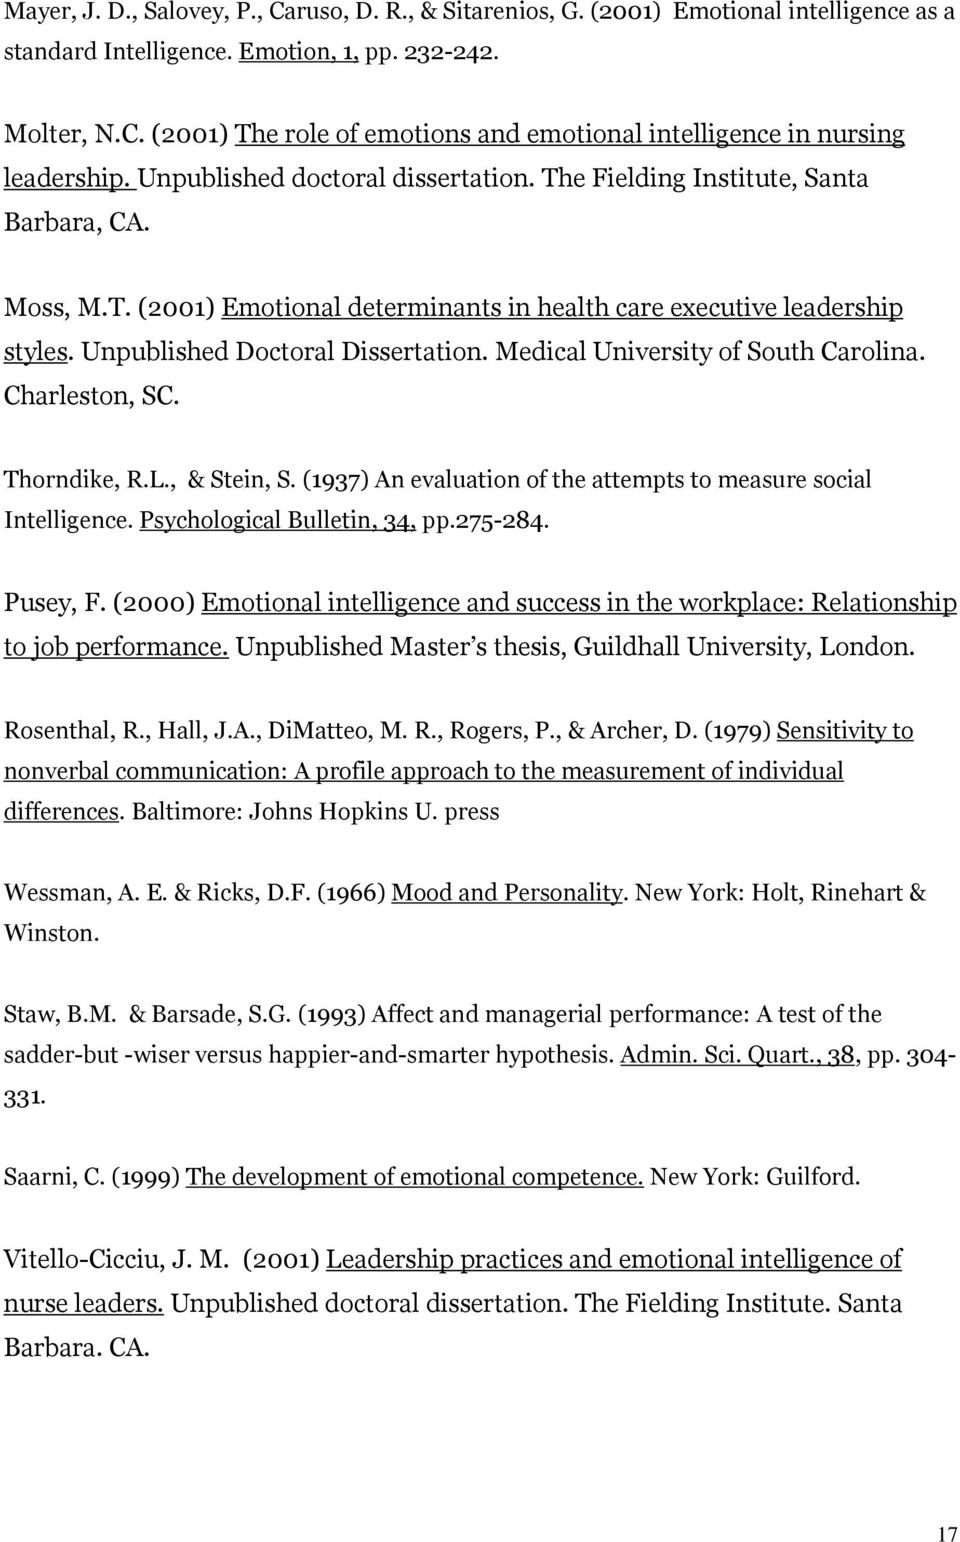 Medical University of South Carolina. Charleston, SC. Thorndike, R.L., & Stein, S. (1937) An evaluation of the attempts to measure social Intelligence. Psychological Bulletin, 34, pp.275-284.